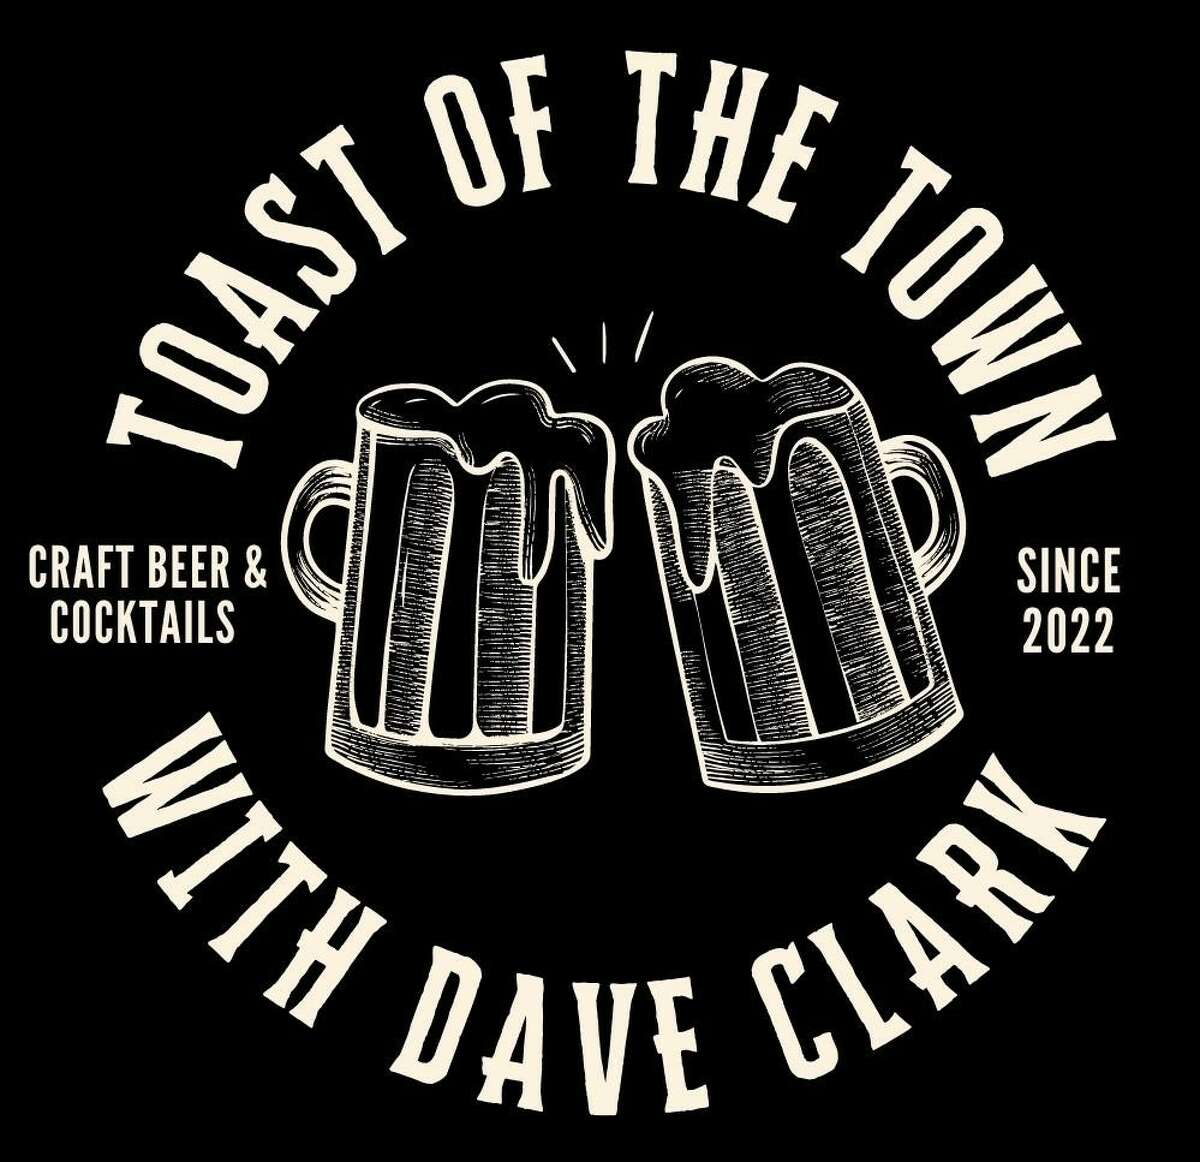 Toast of the Town is a weekly column that explores craft beer and cocktail culture in the Midland area.